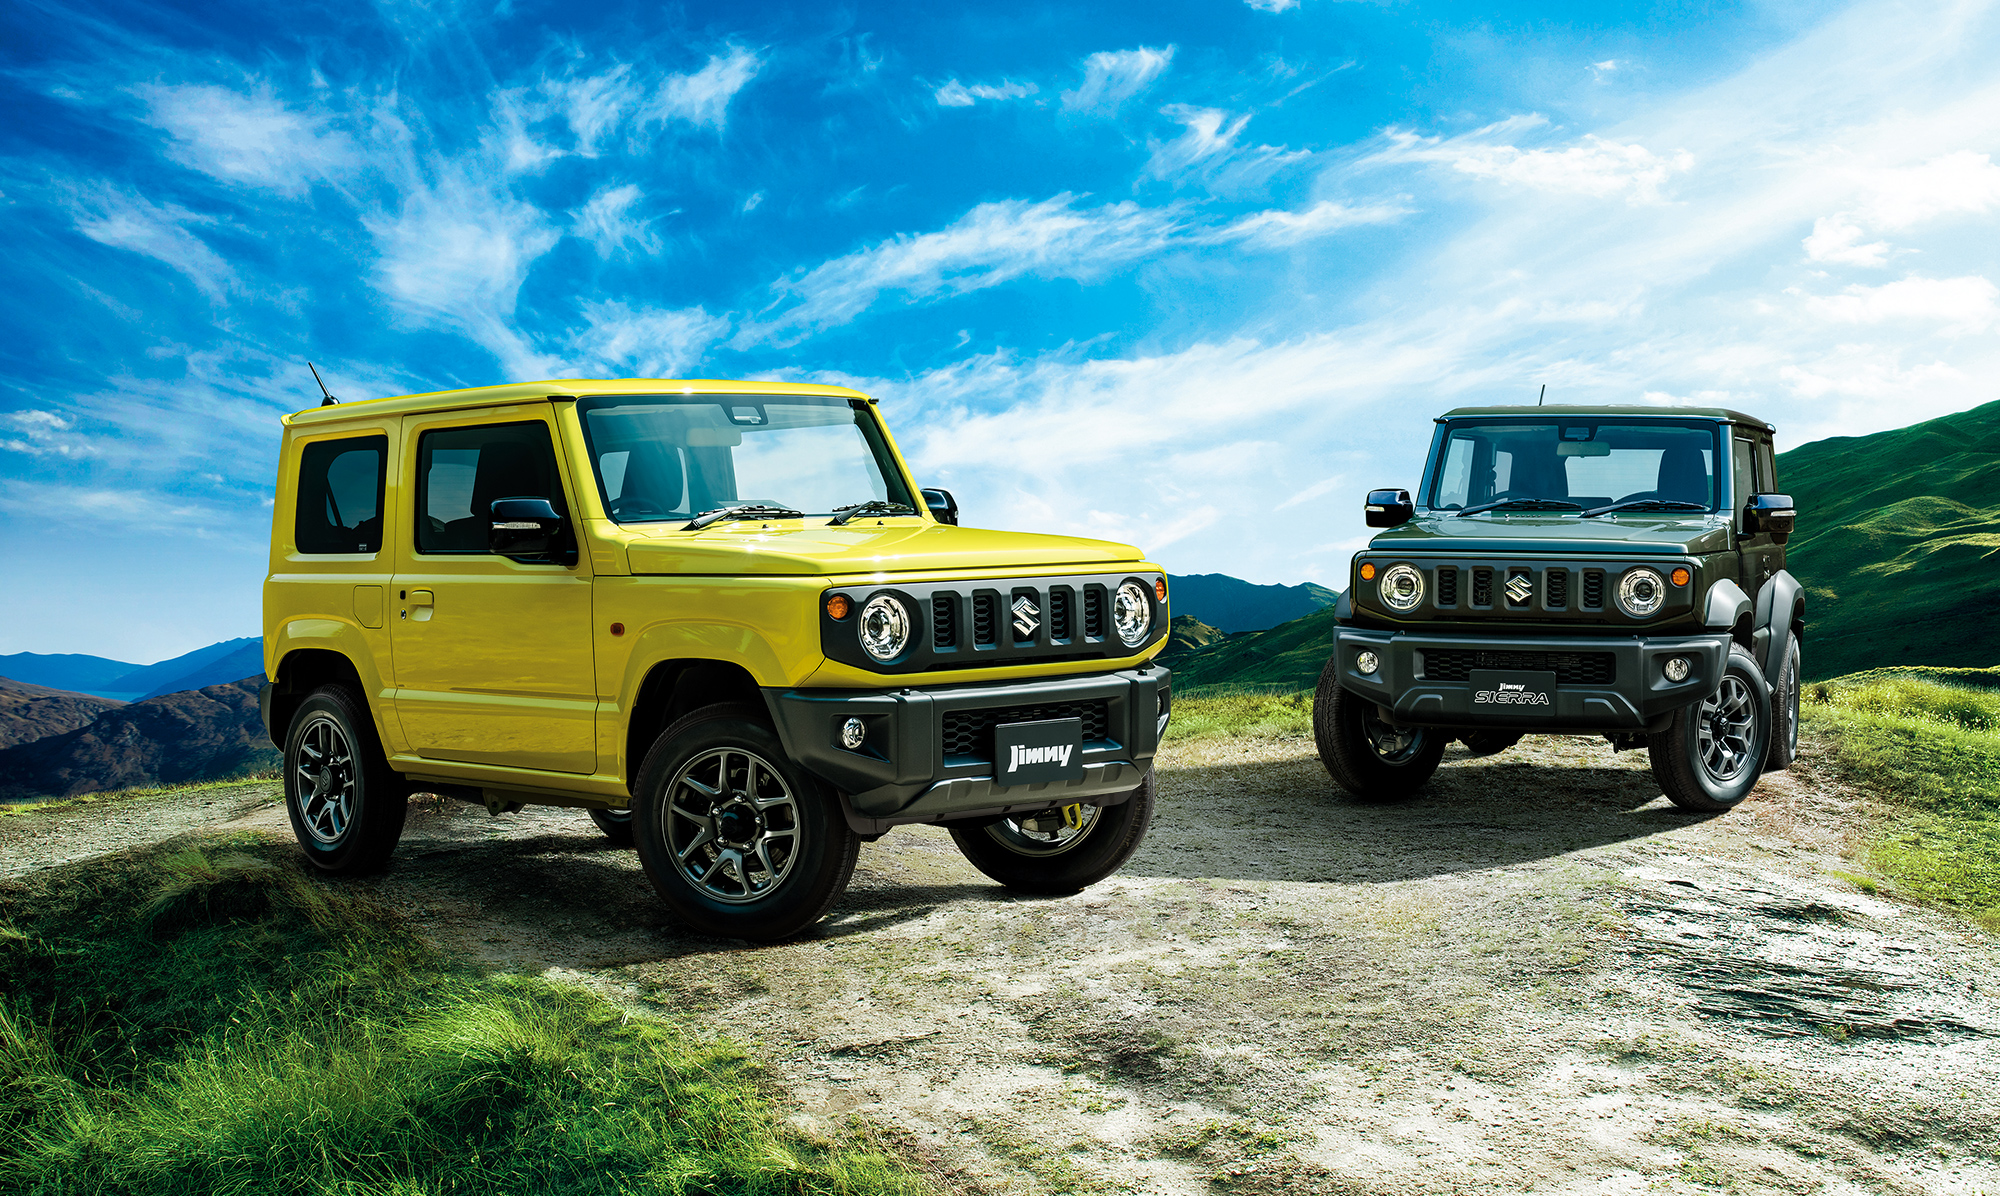 http://www.suzuki.co.jp/car/jimny/special/index/image/pc_cover.jpg